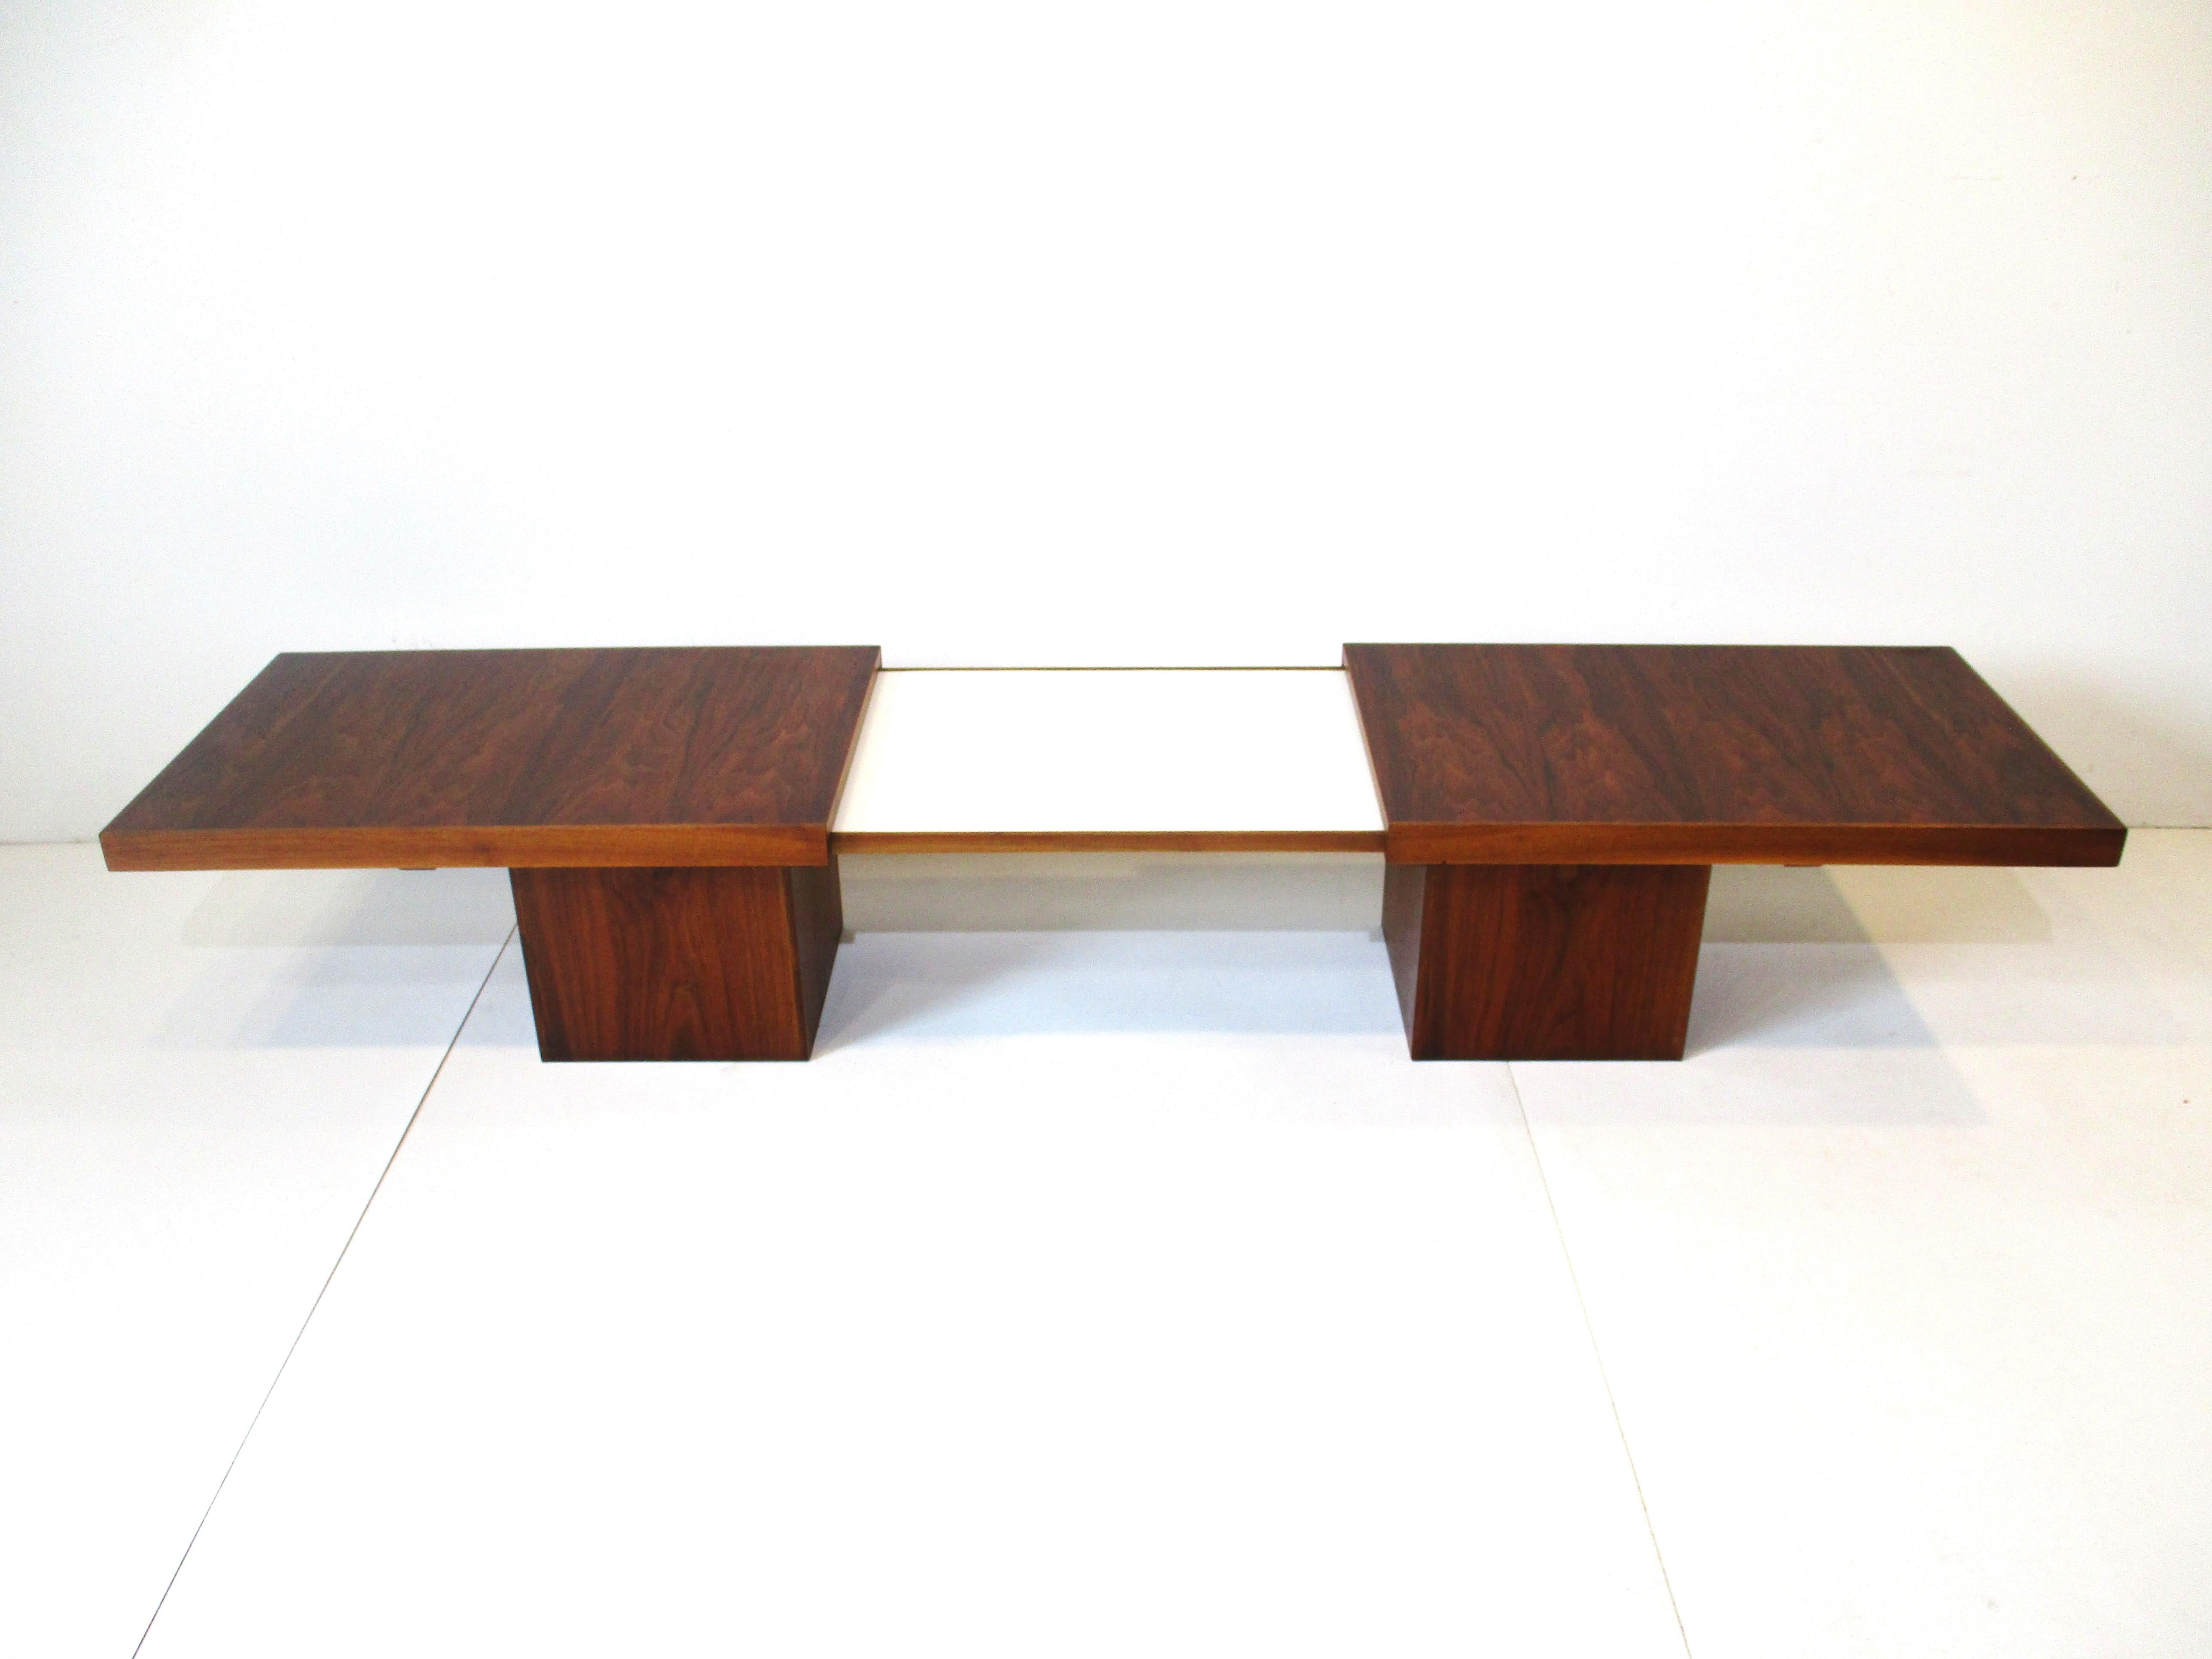 A rich medium dark walnut coffee table that expands to 82 .5 